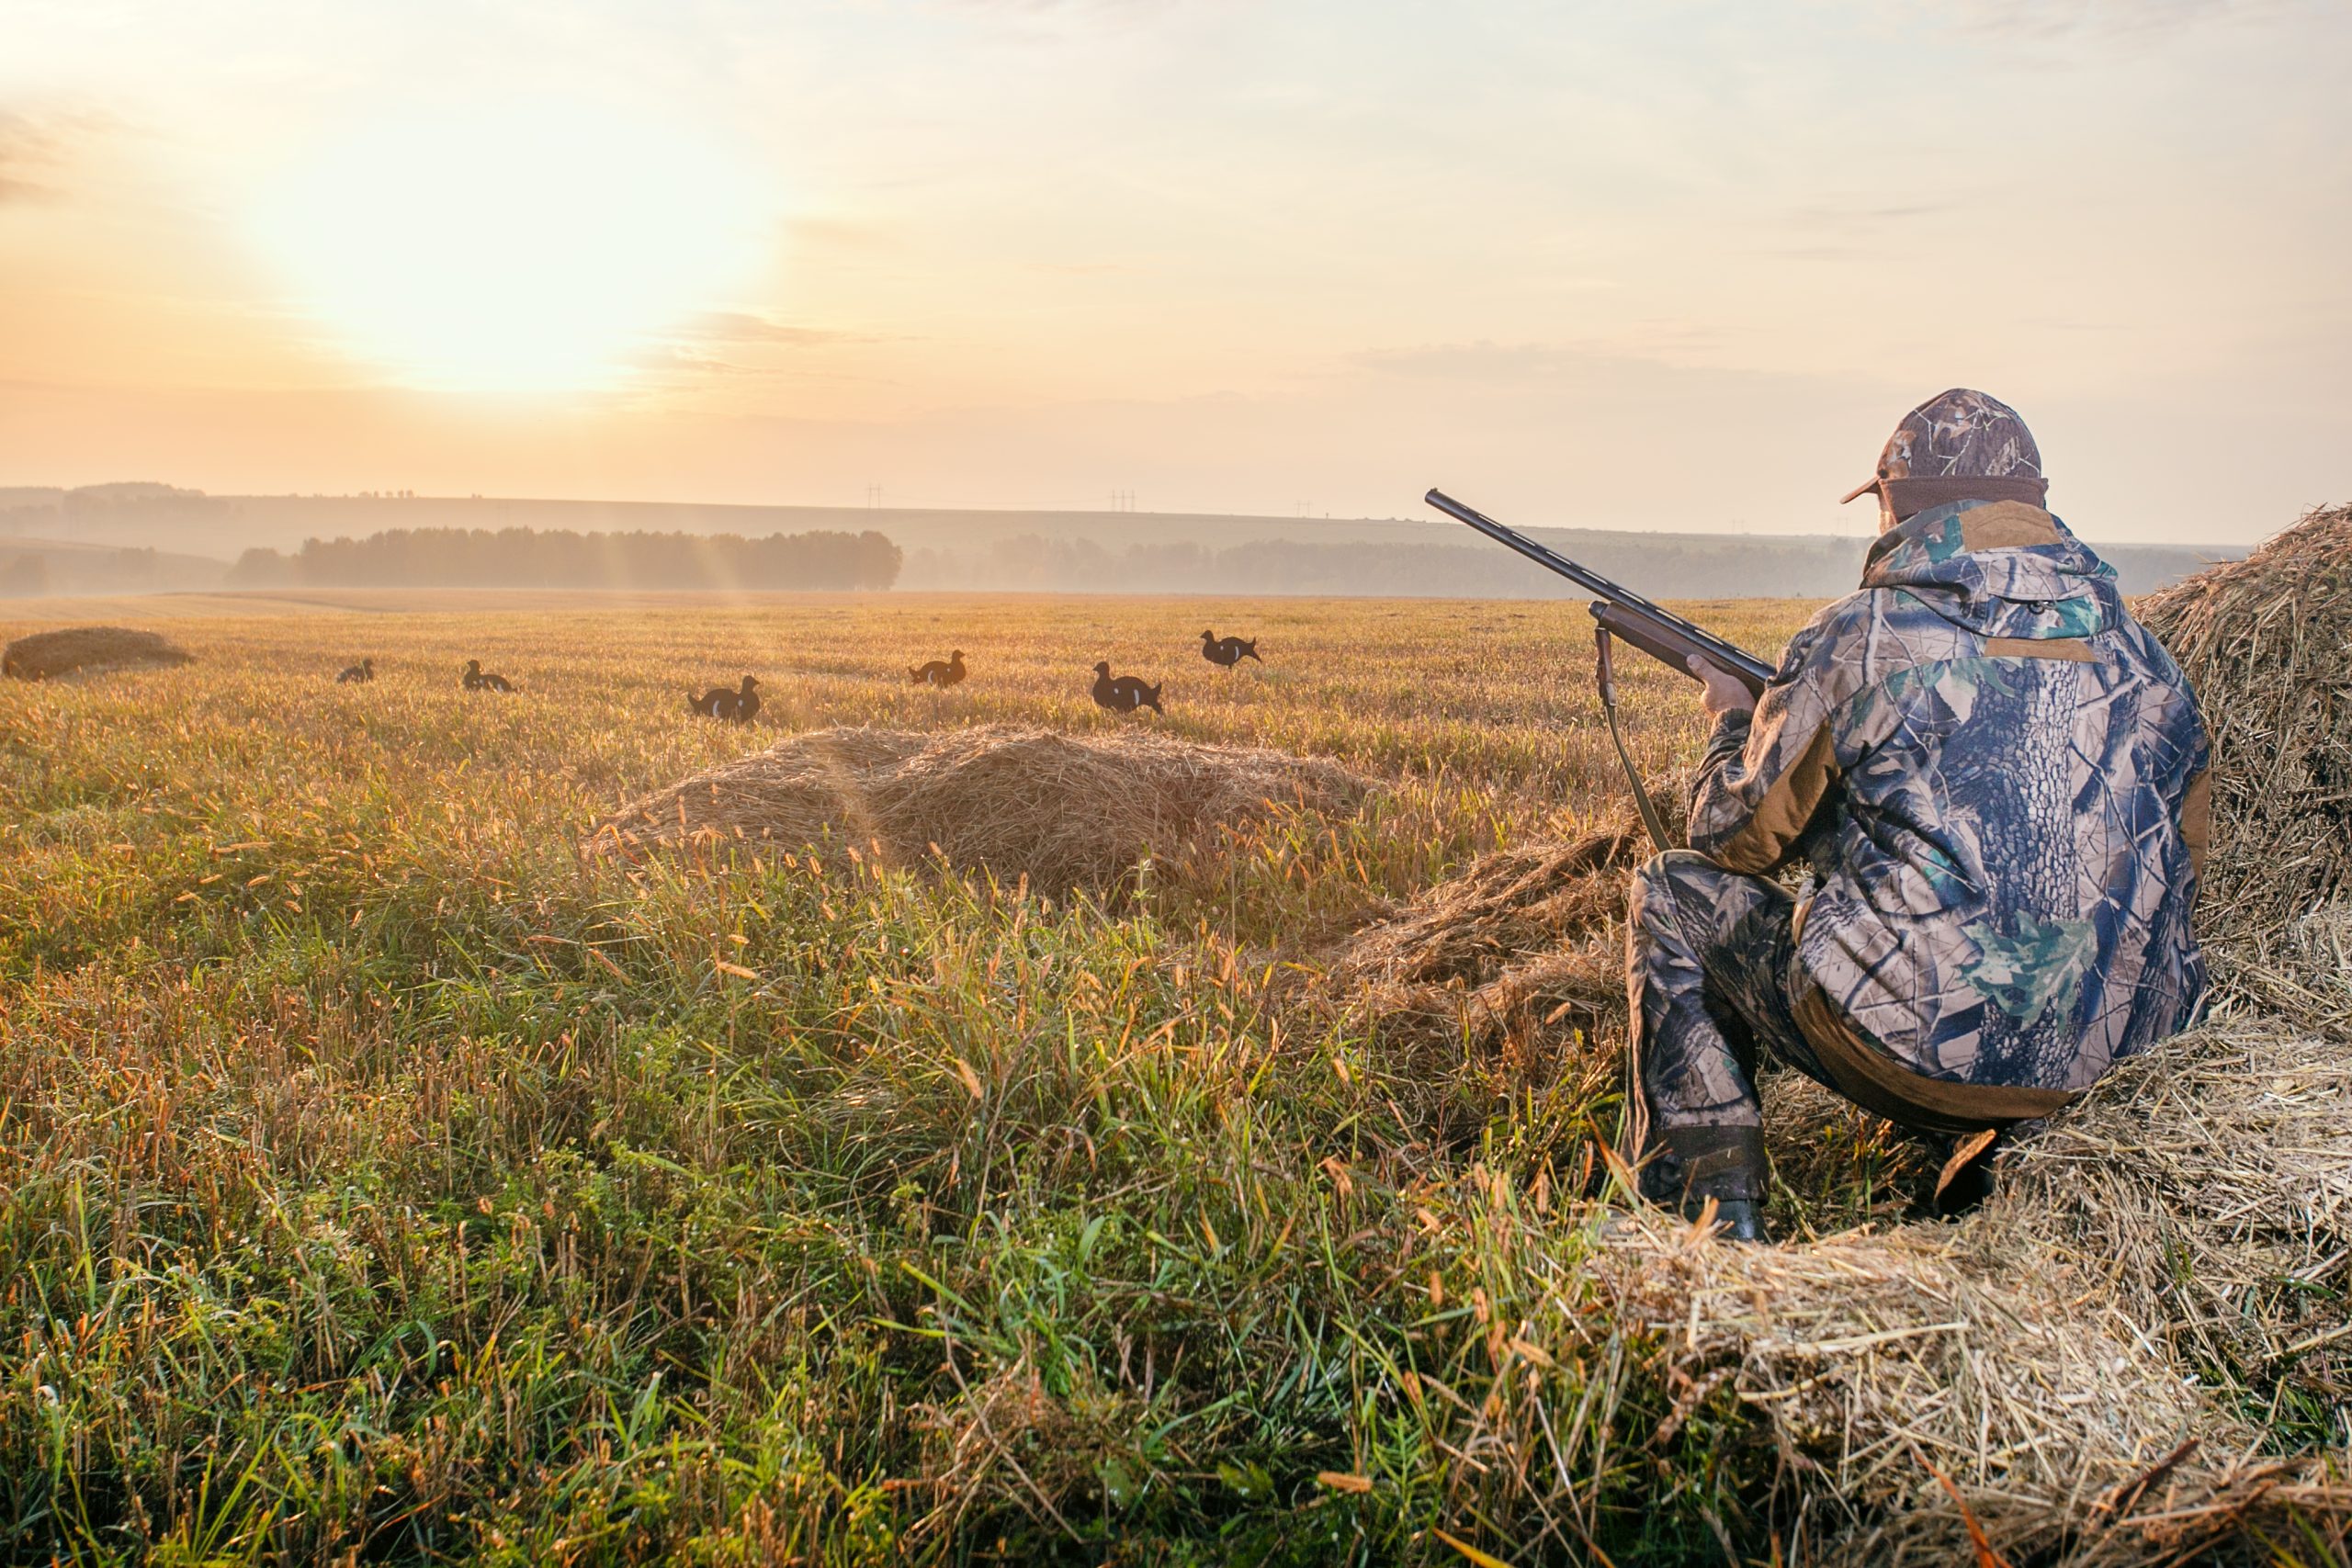 Hunter hunched over preparing to shoot birds